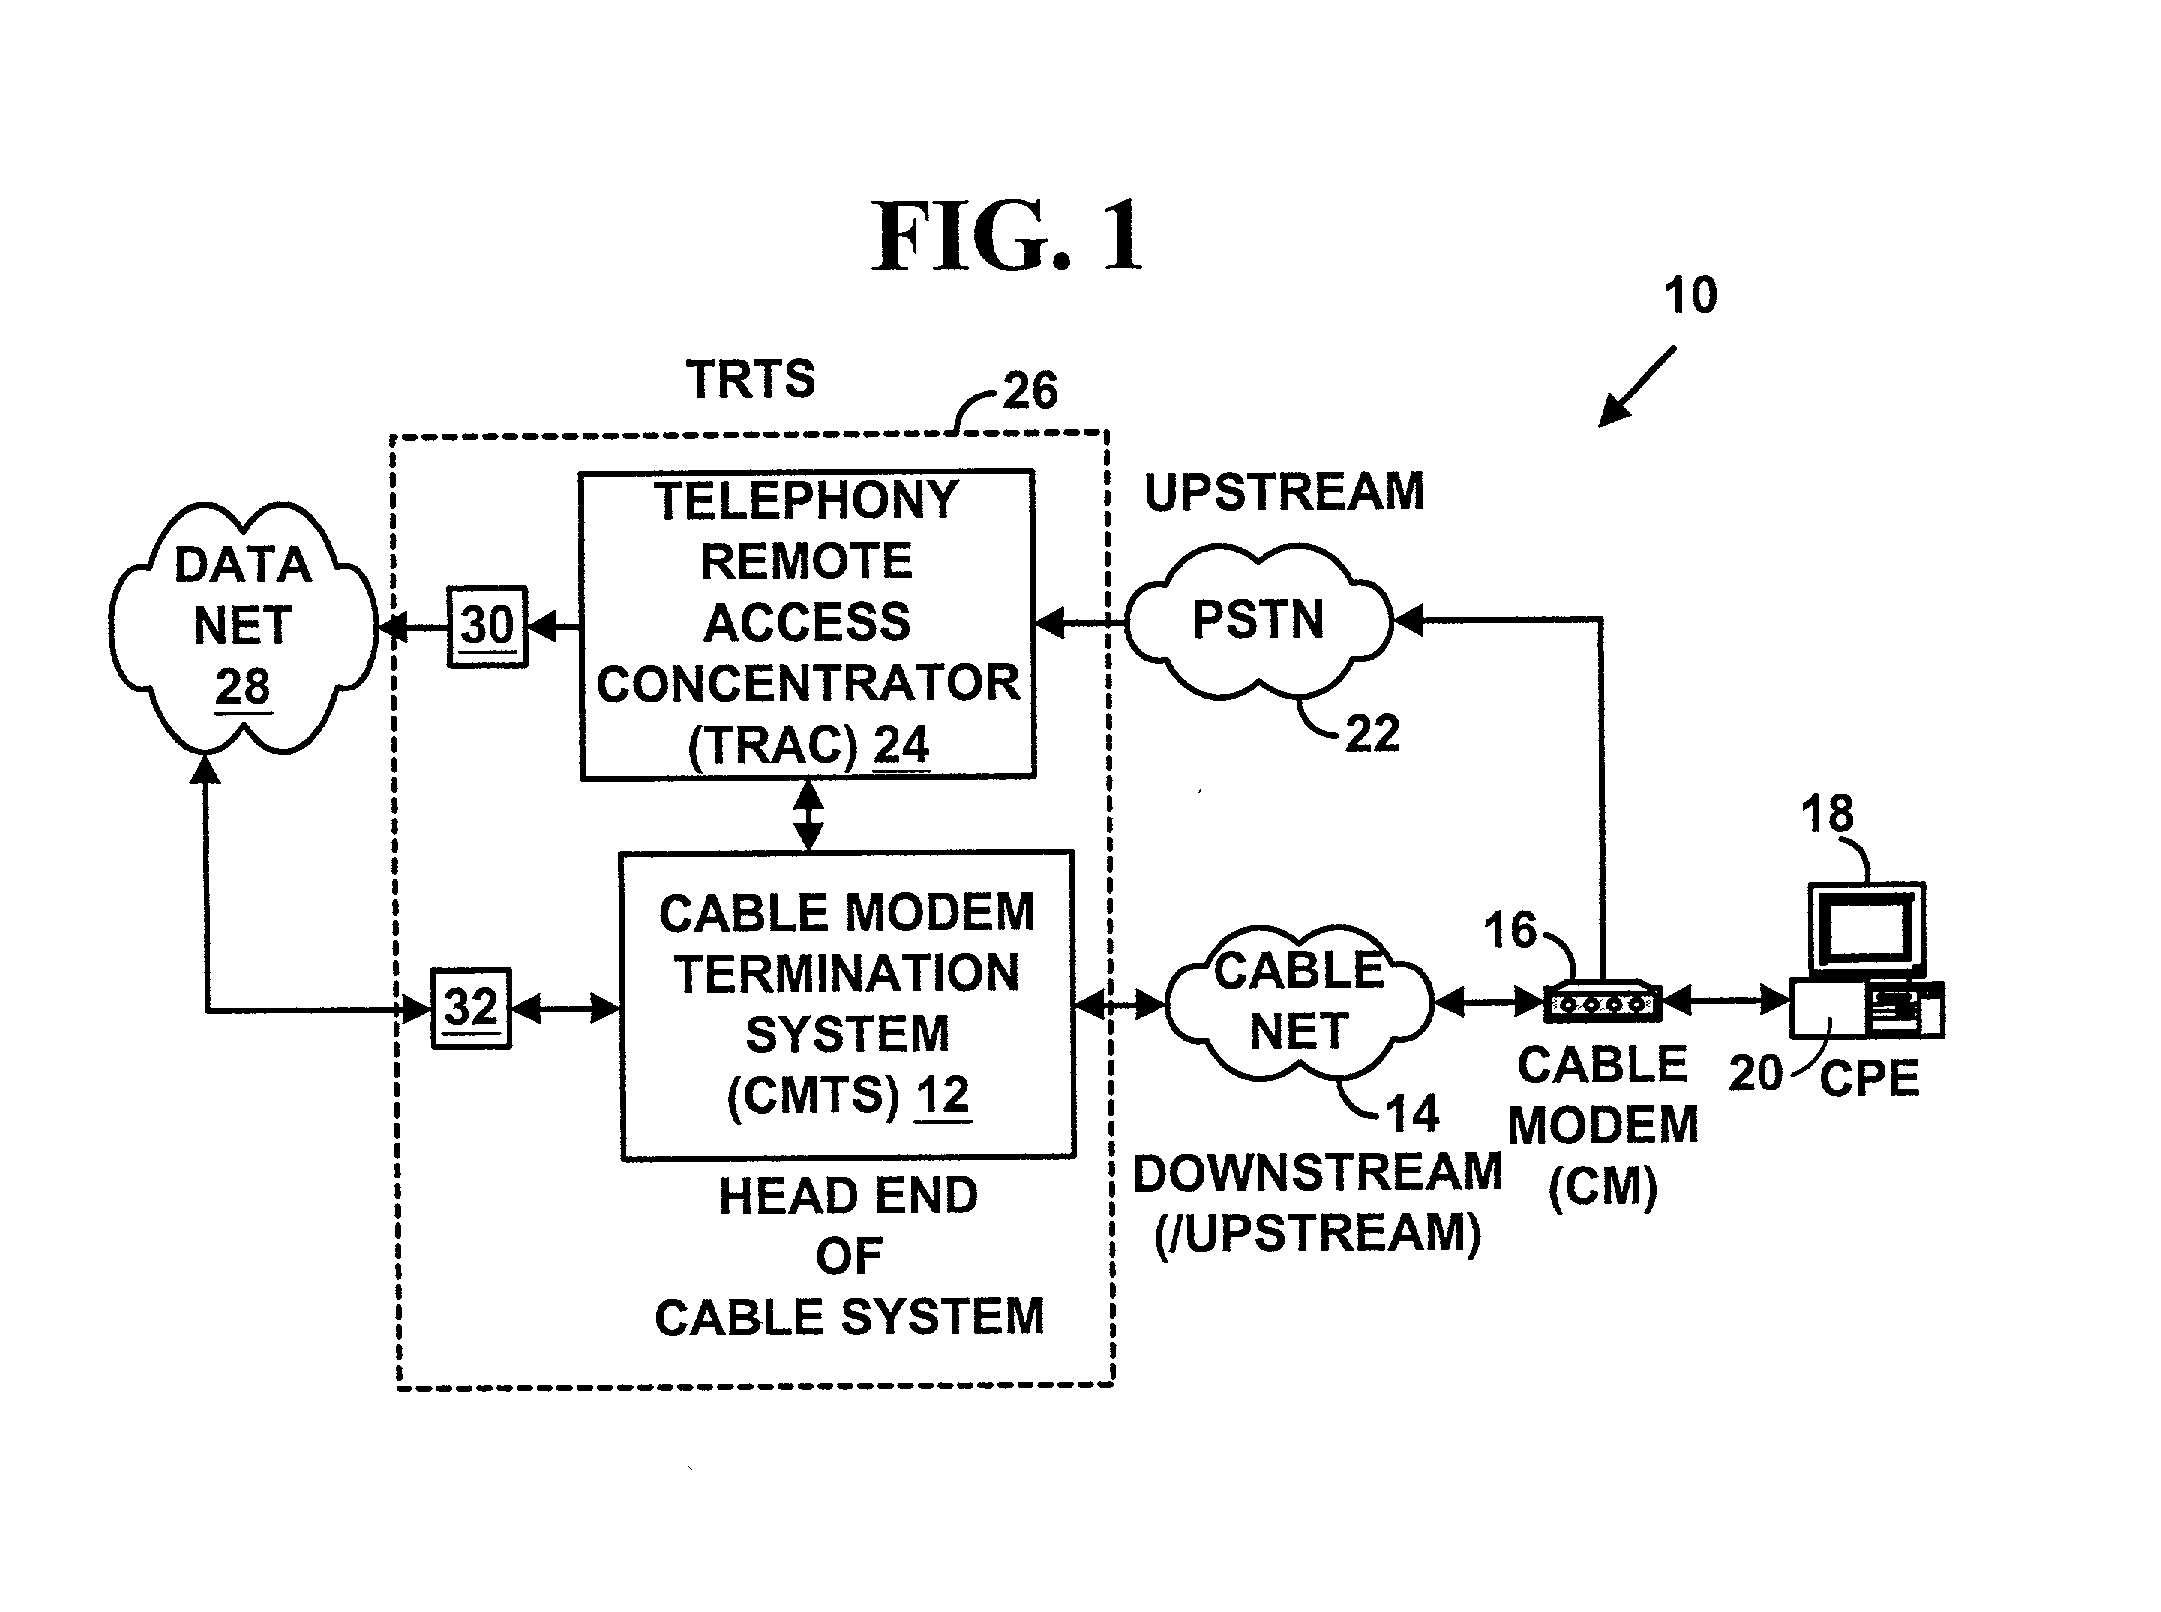 Method for using an initial maintenance opportunity for non-contention ranging